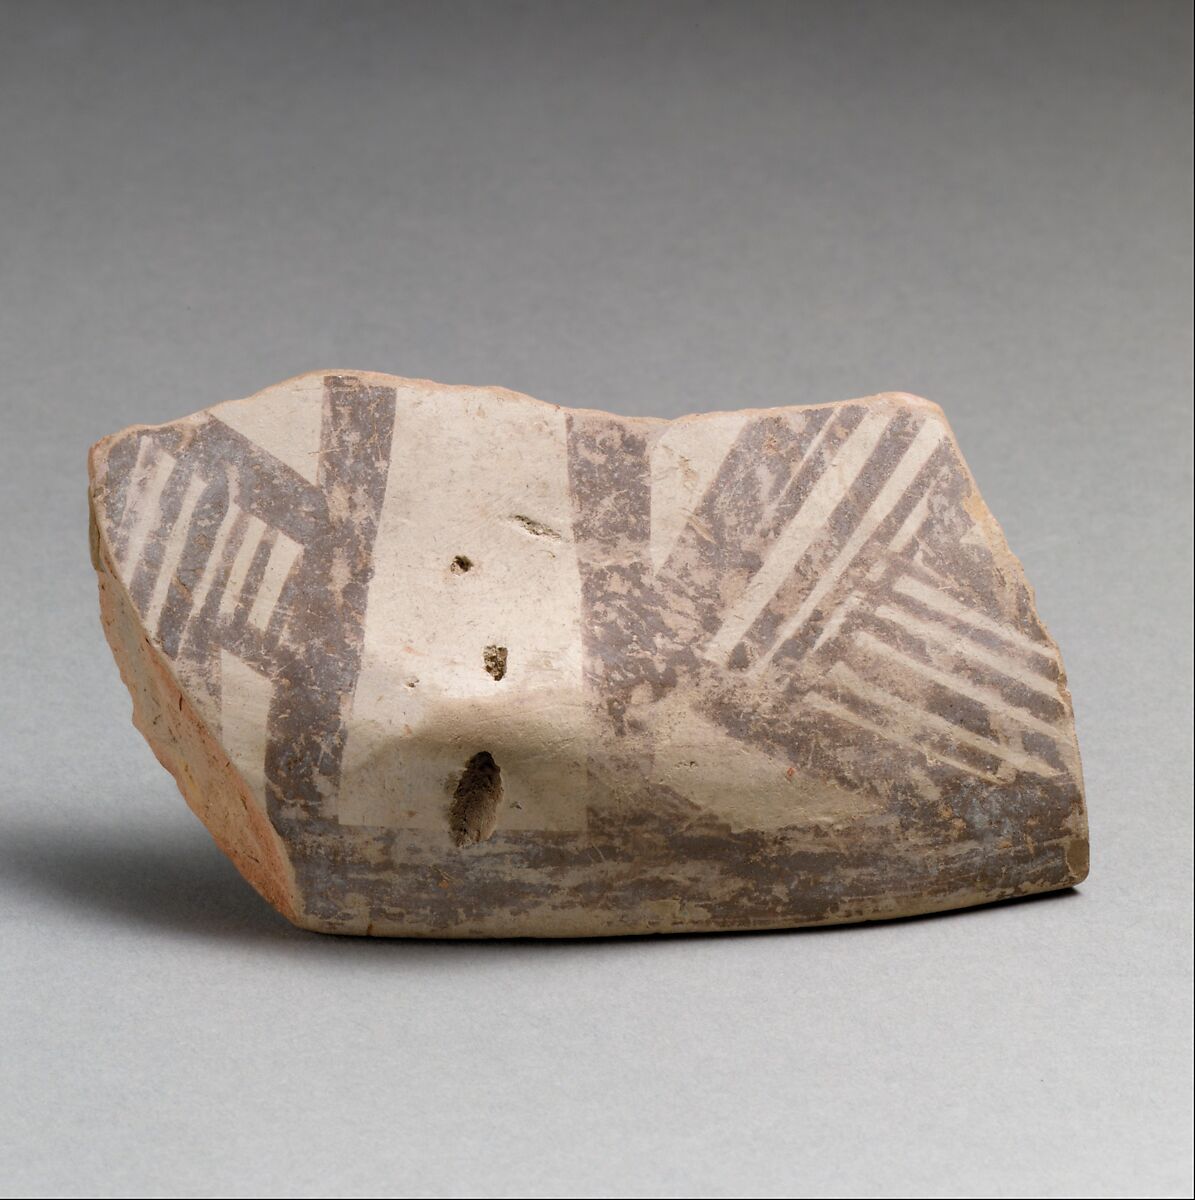 Terracotta rim fragment with lug and linear decoration, Terracotta, Dimini culture 